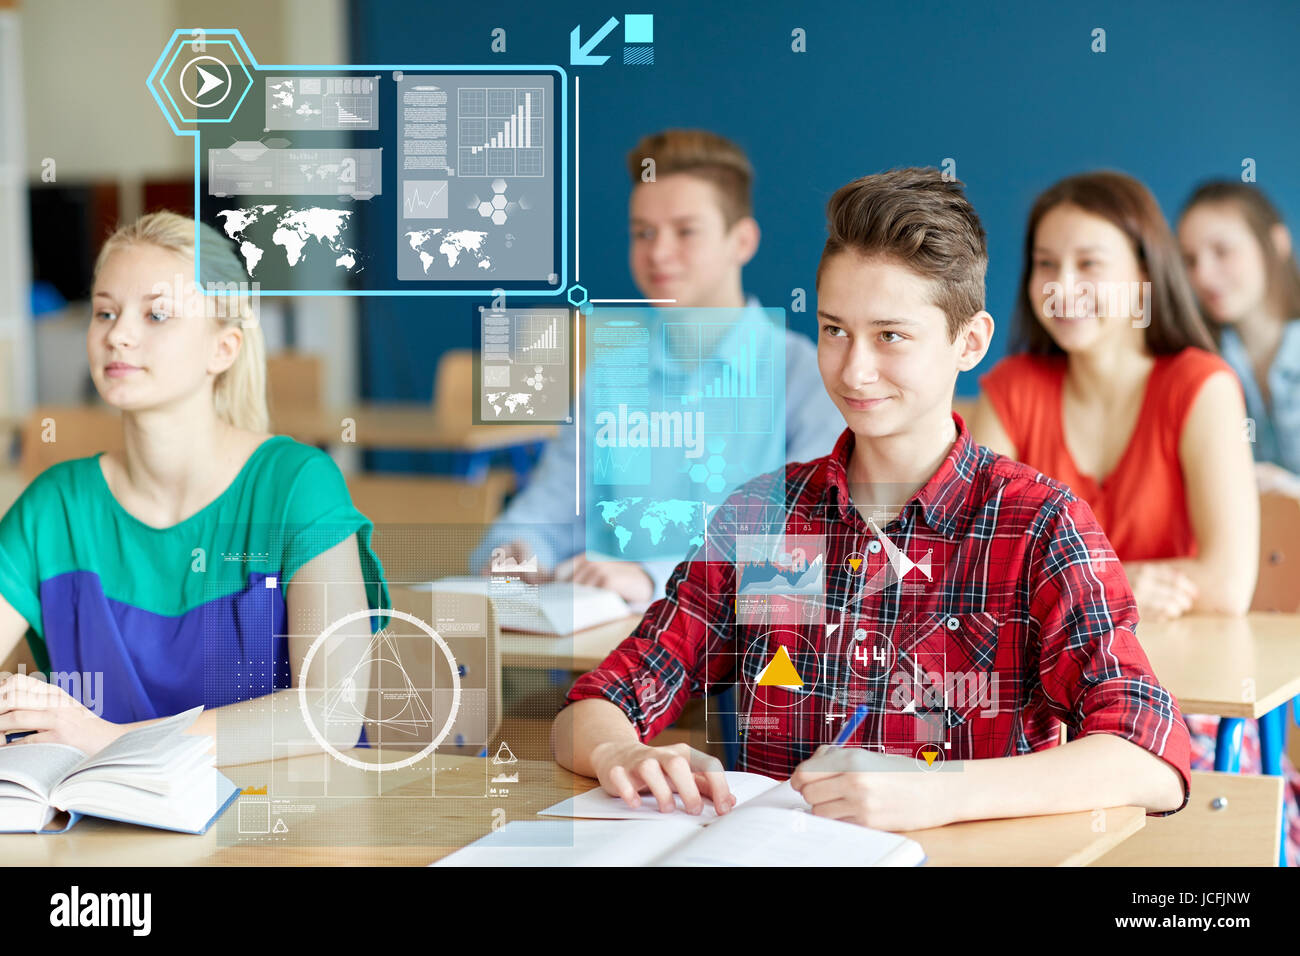 group of students with notebooks at school lesson Stock Photo